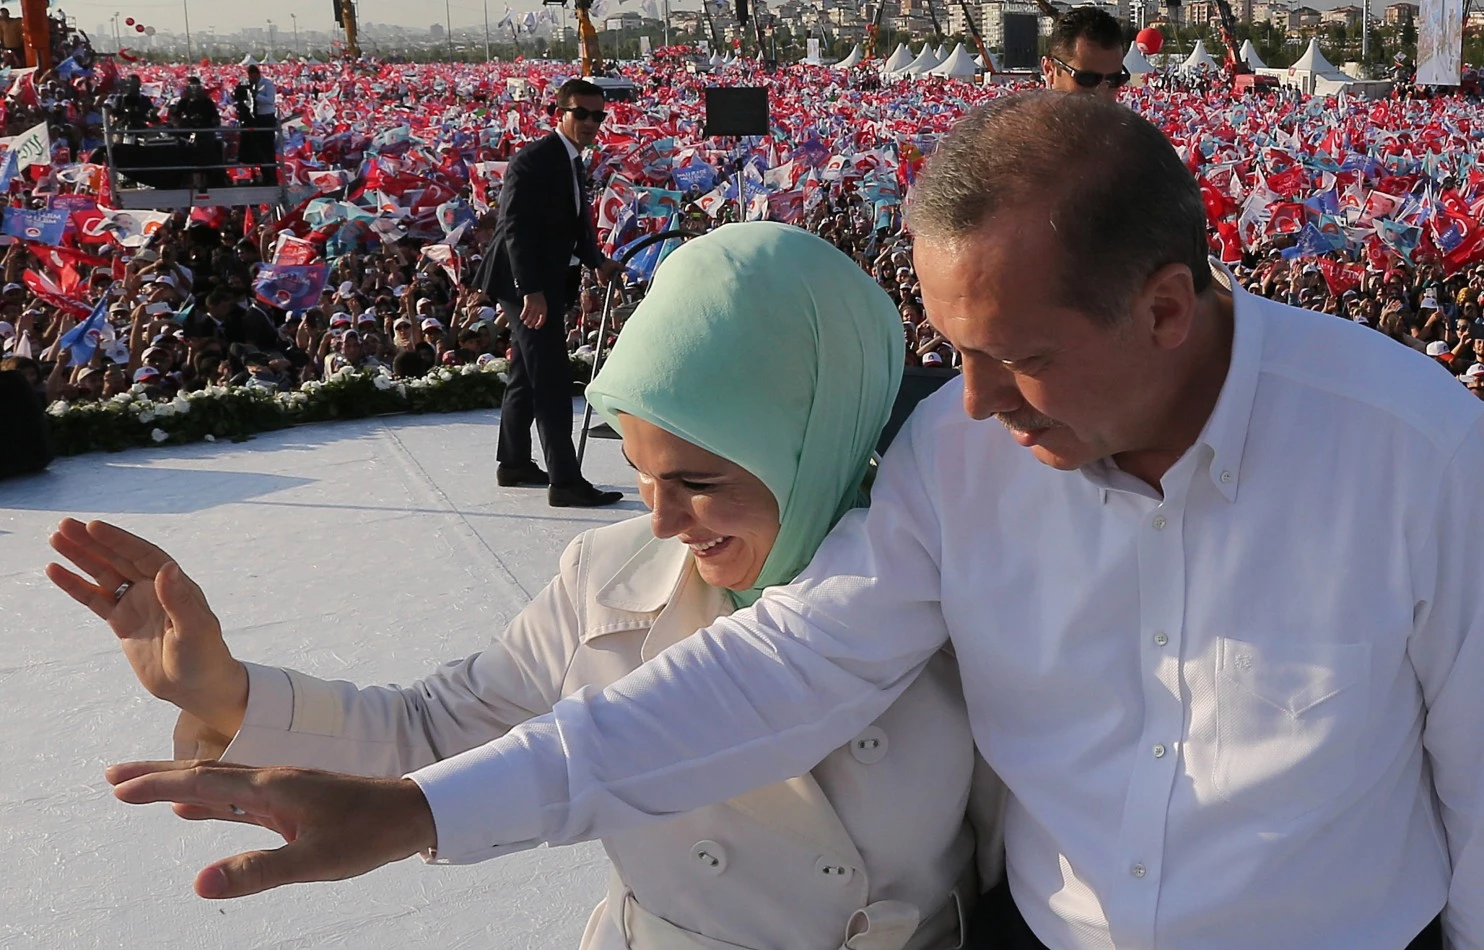 Turkey’s lopsided presidential election campaign